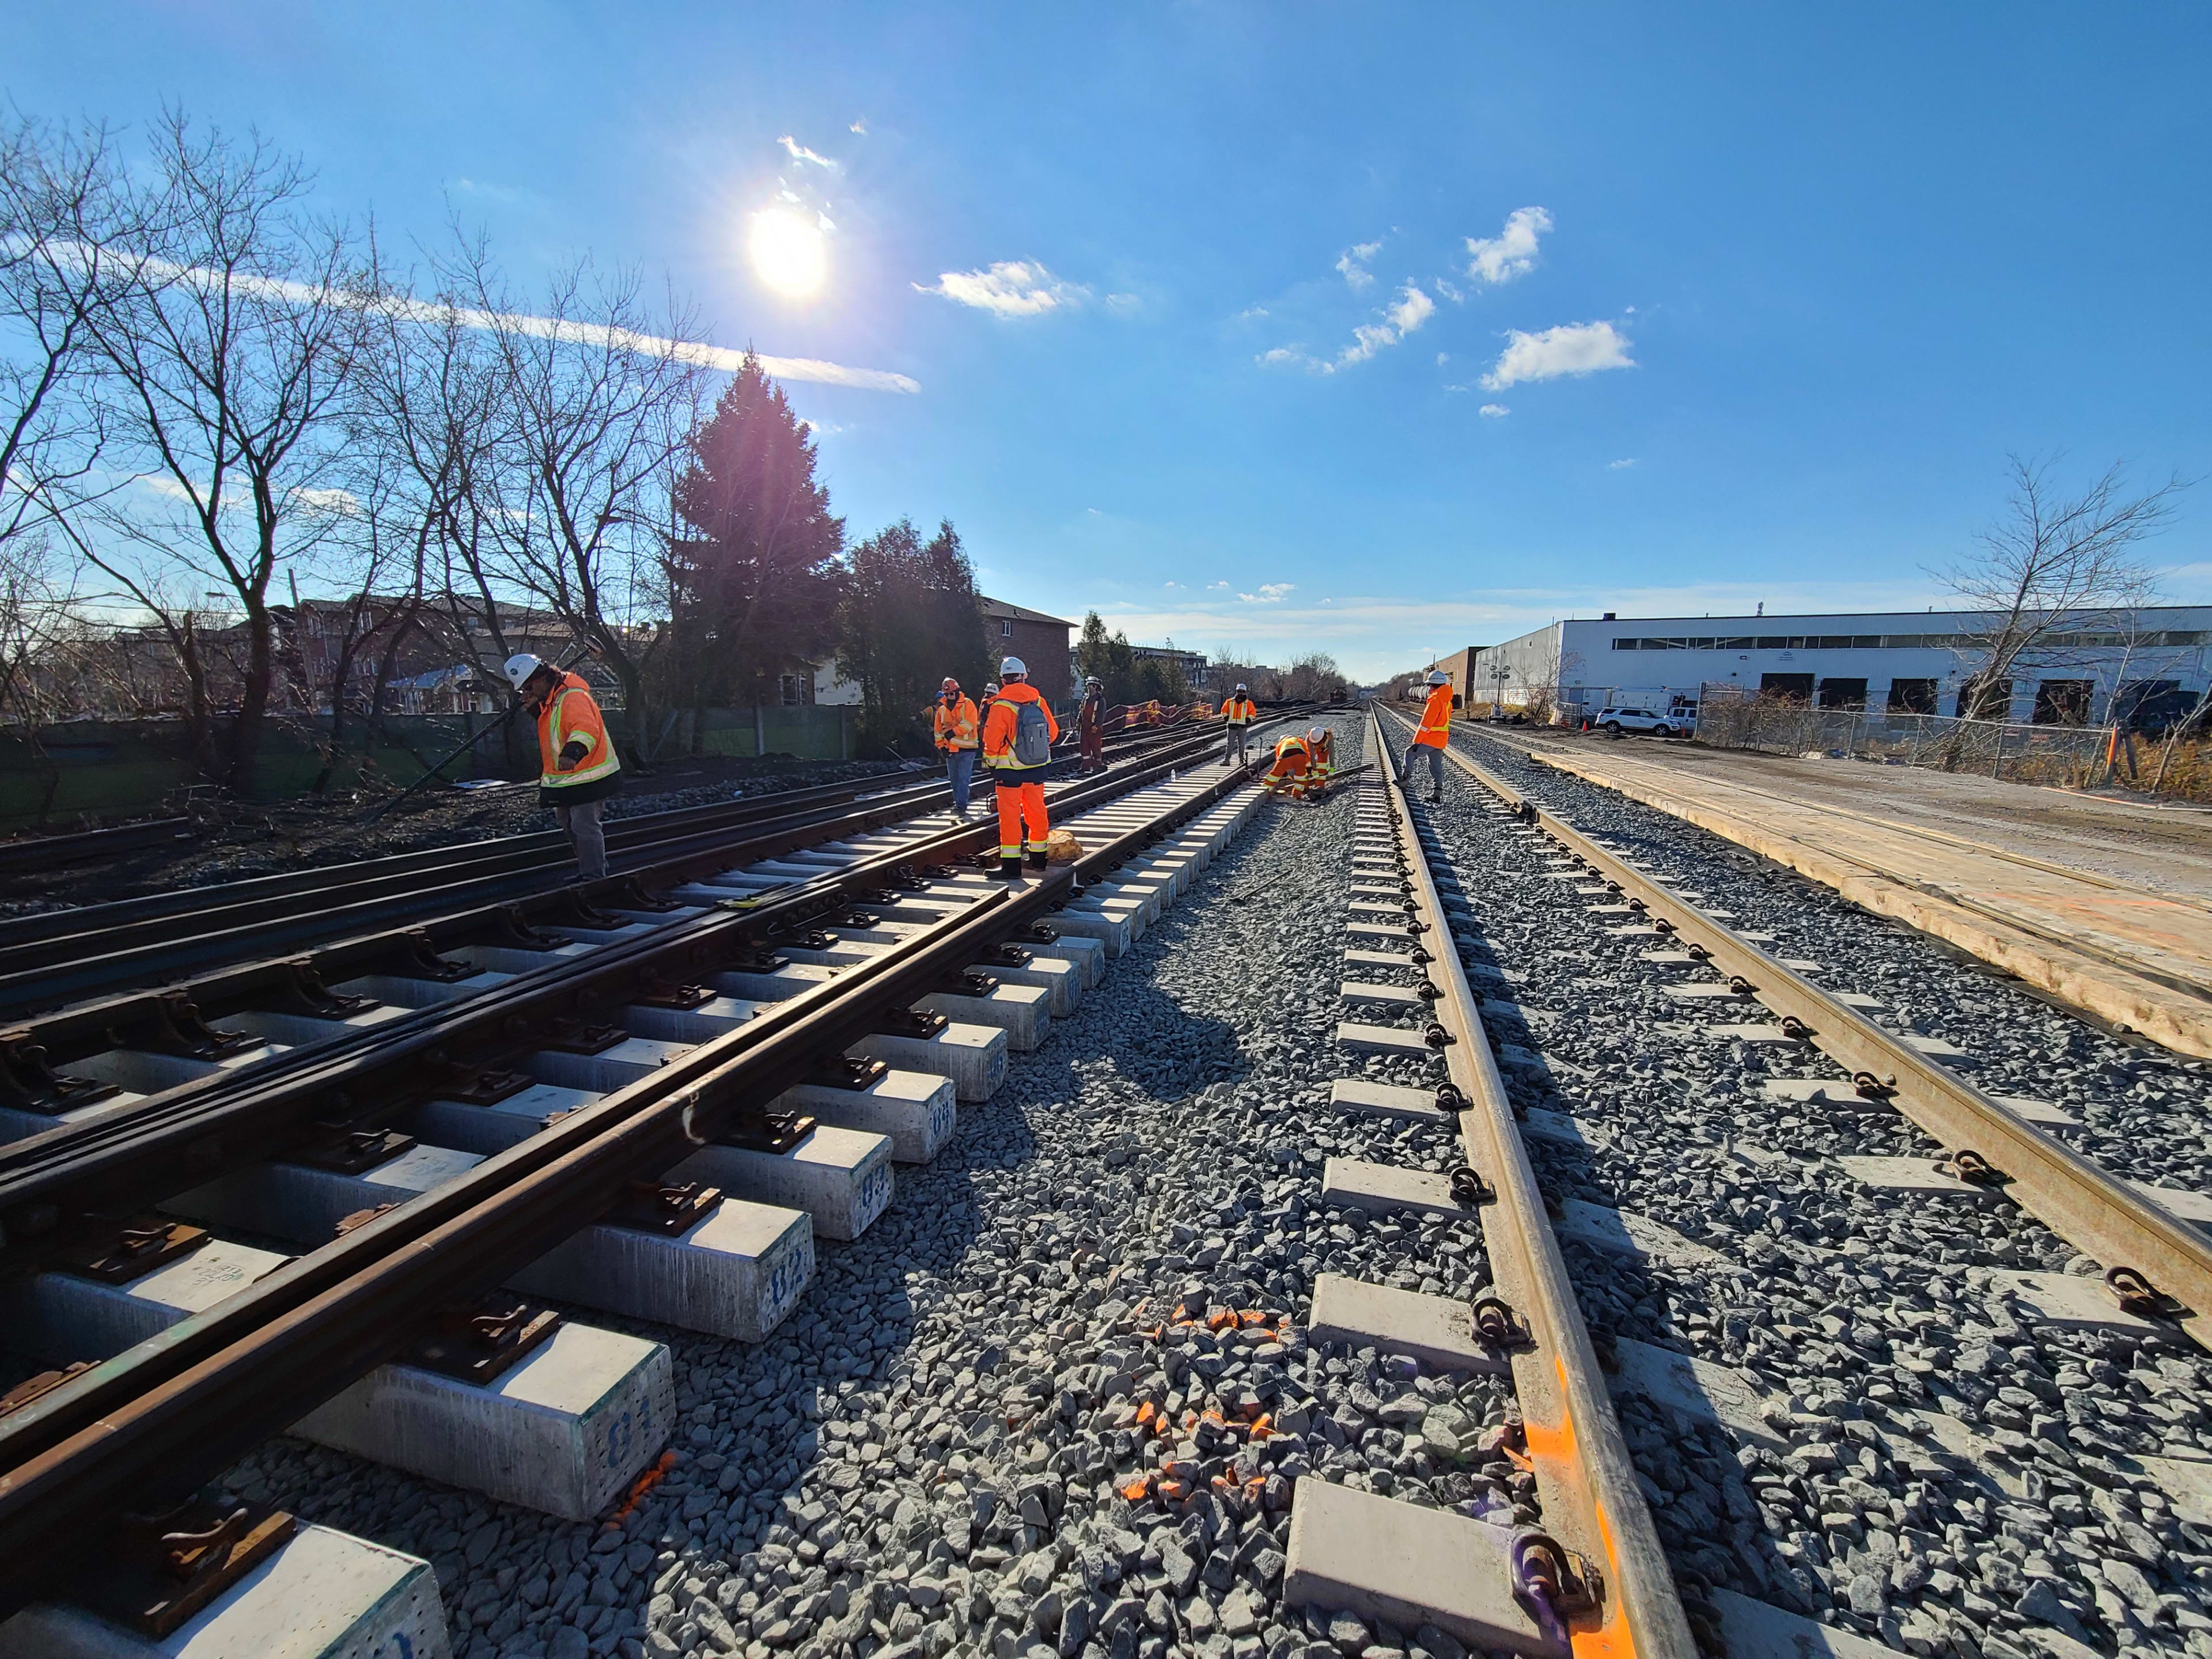 Workers install and inspect large sections of track